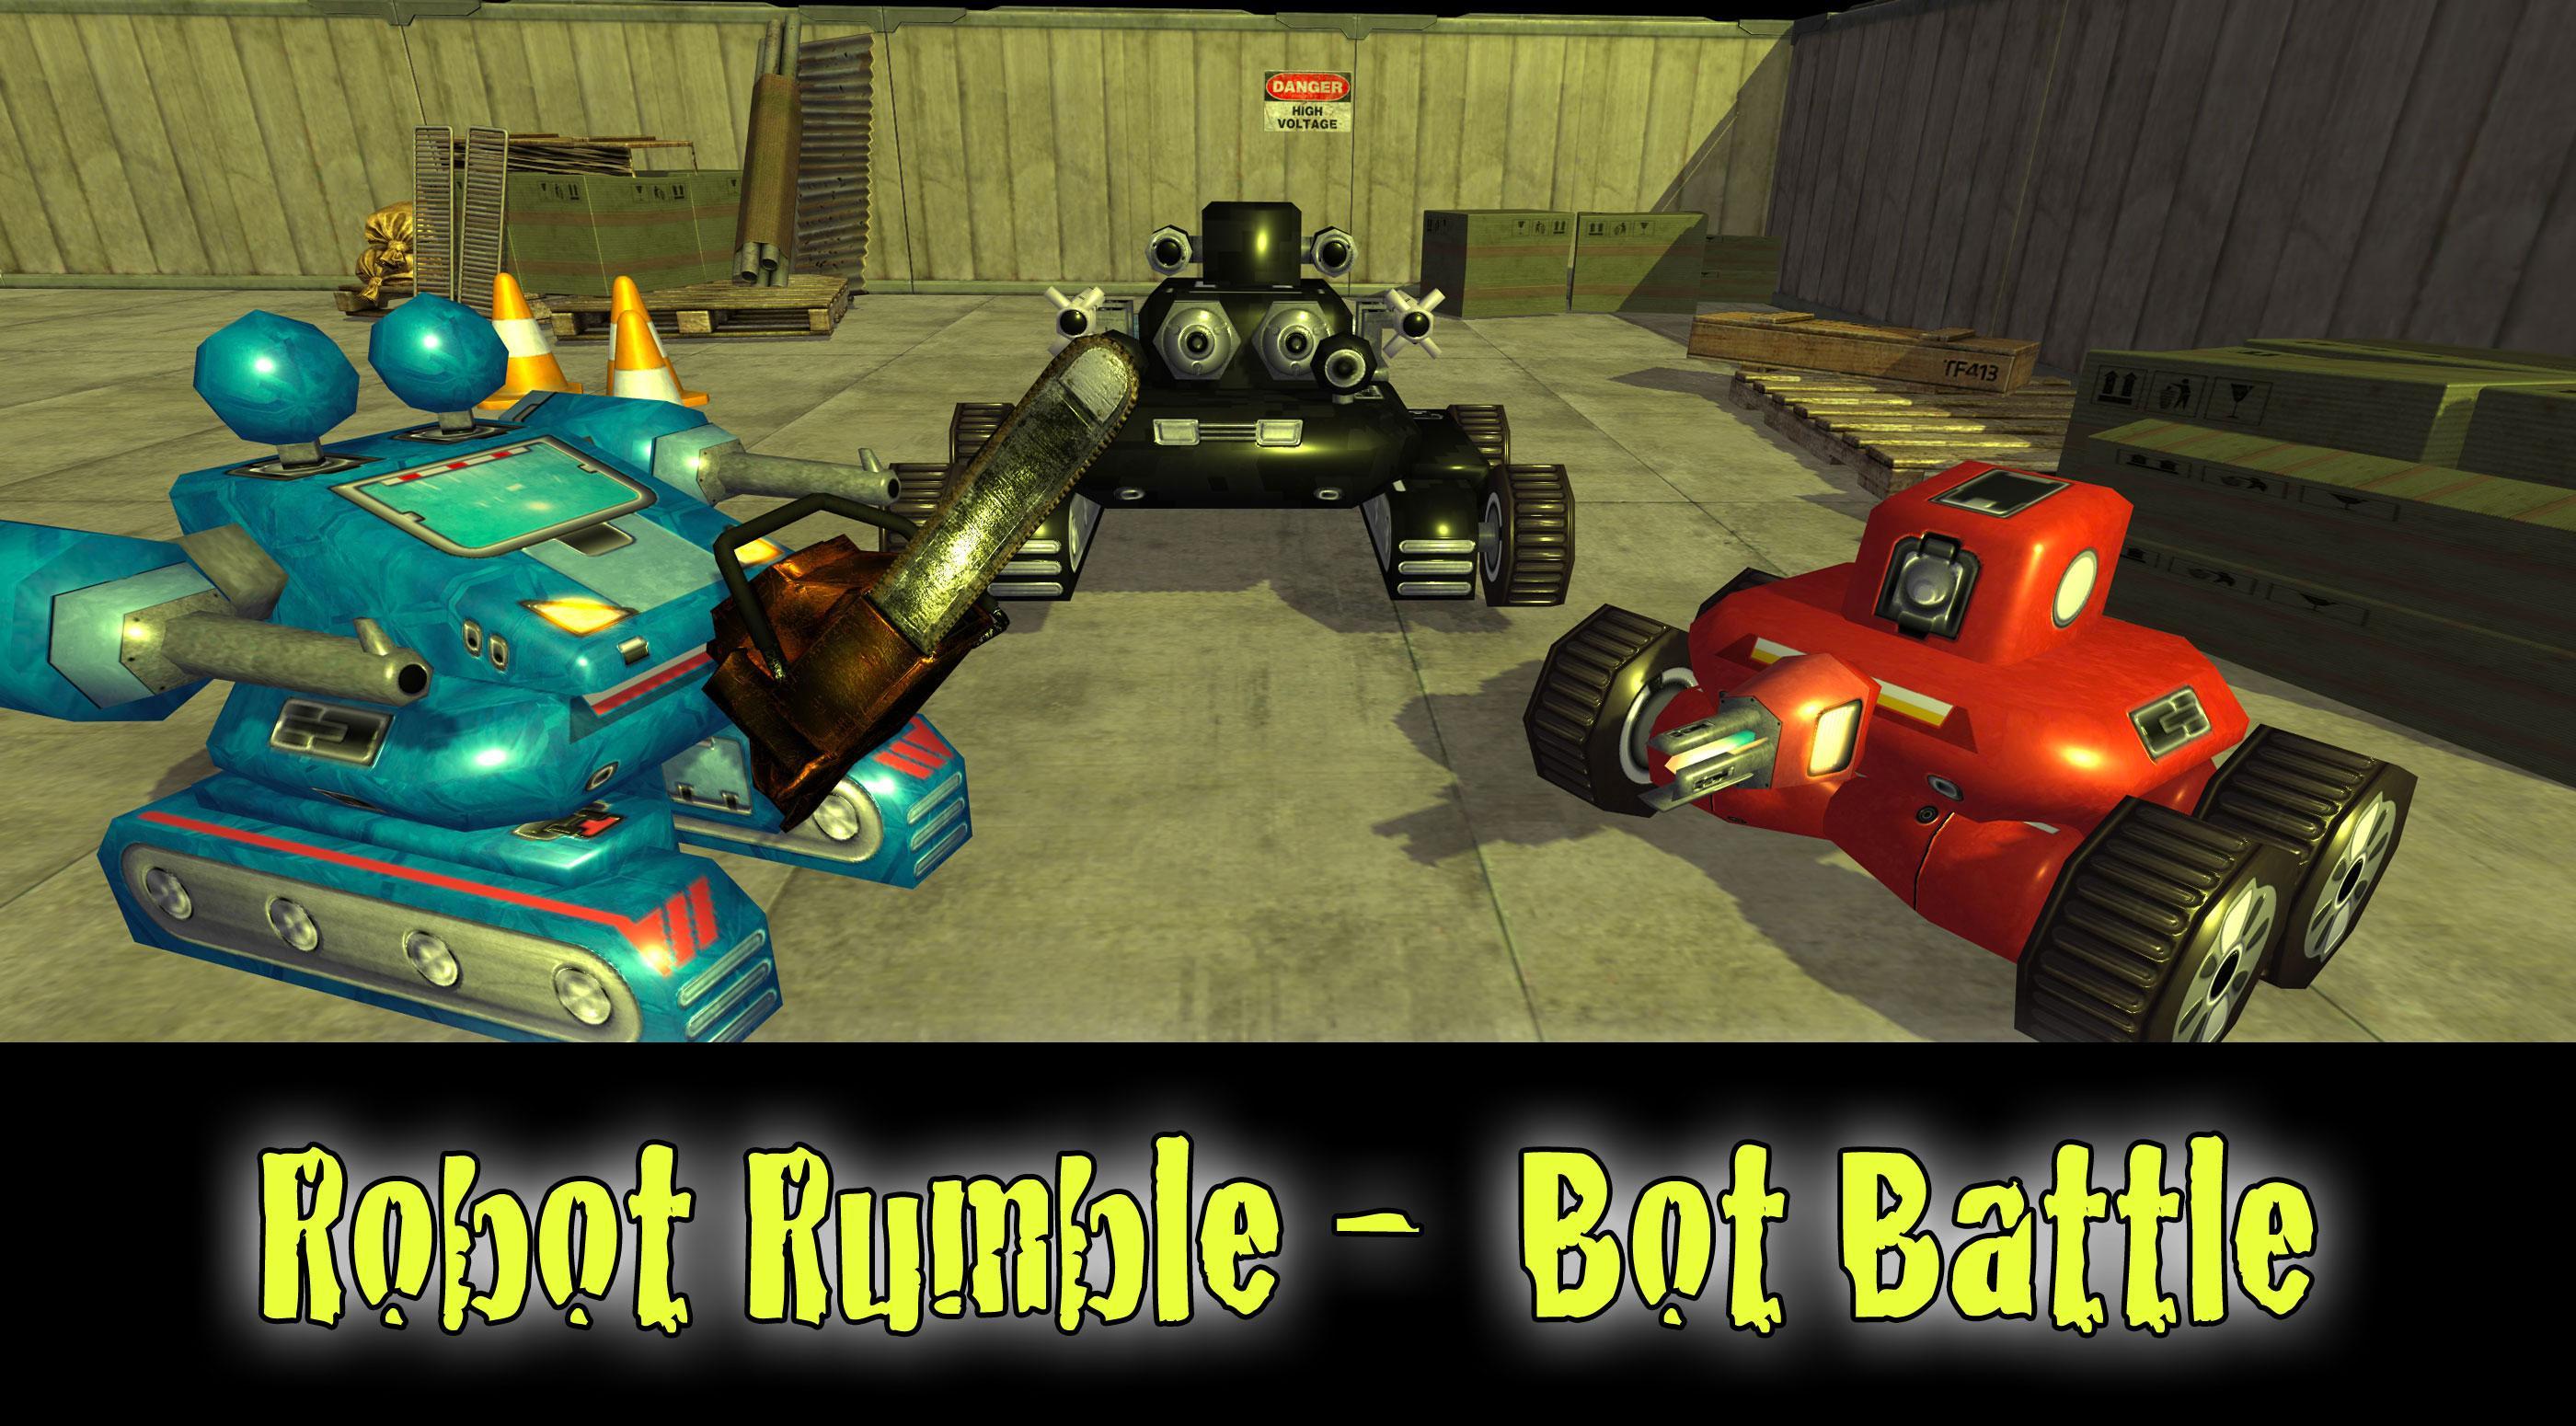 Robot Rumble - Robot Wars Fighting Game for Android - APK Download